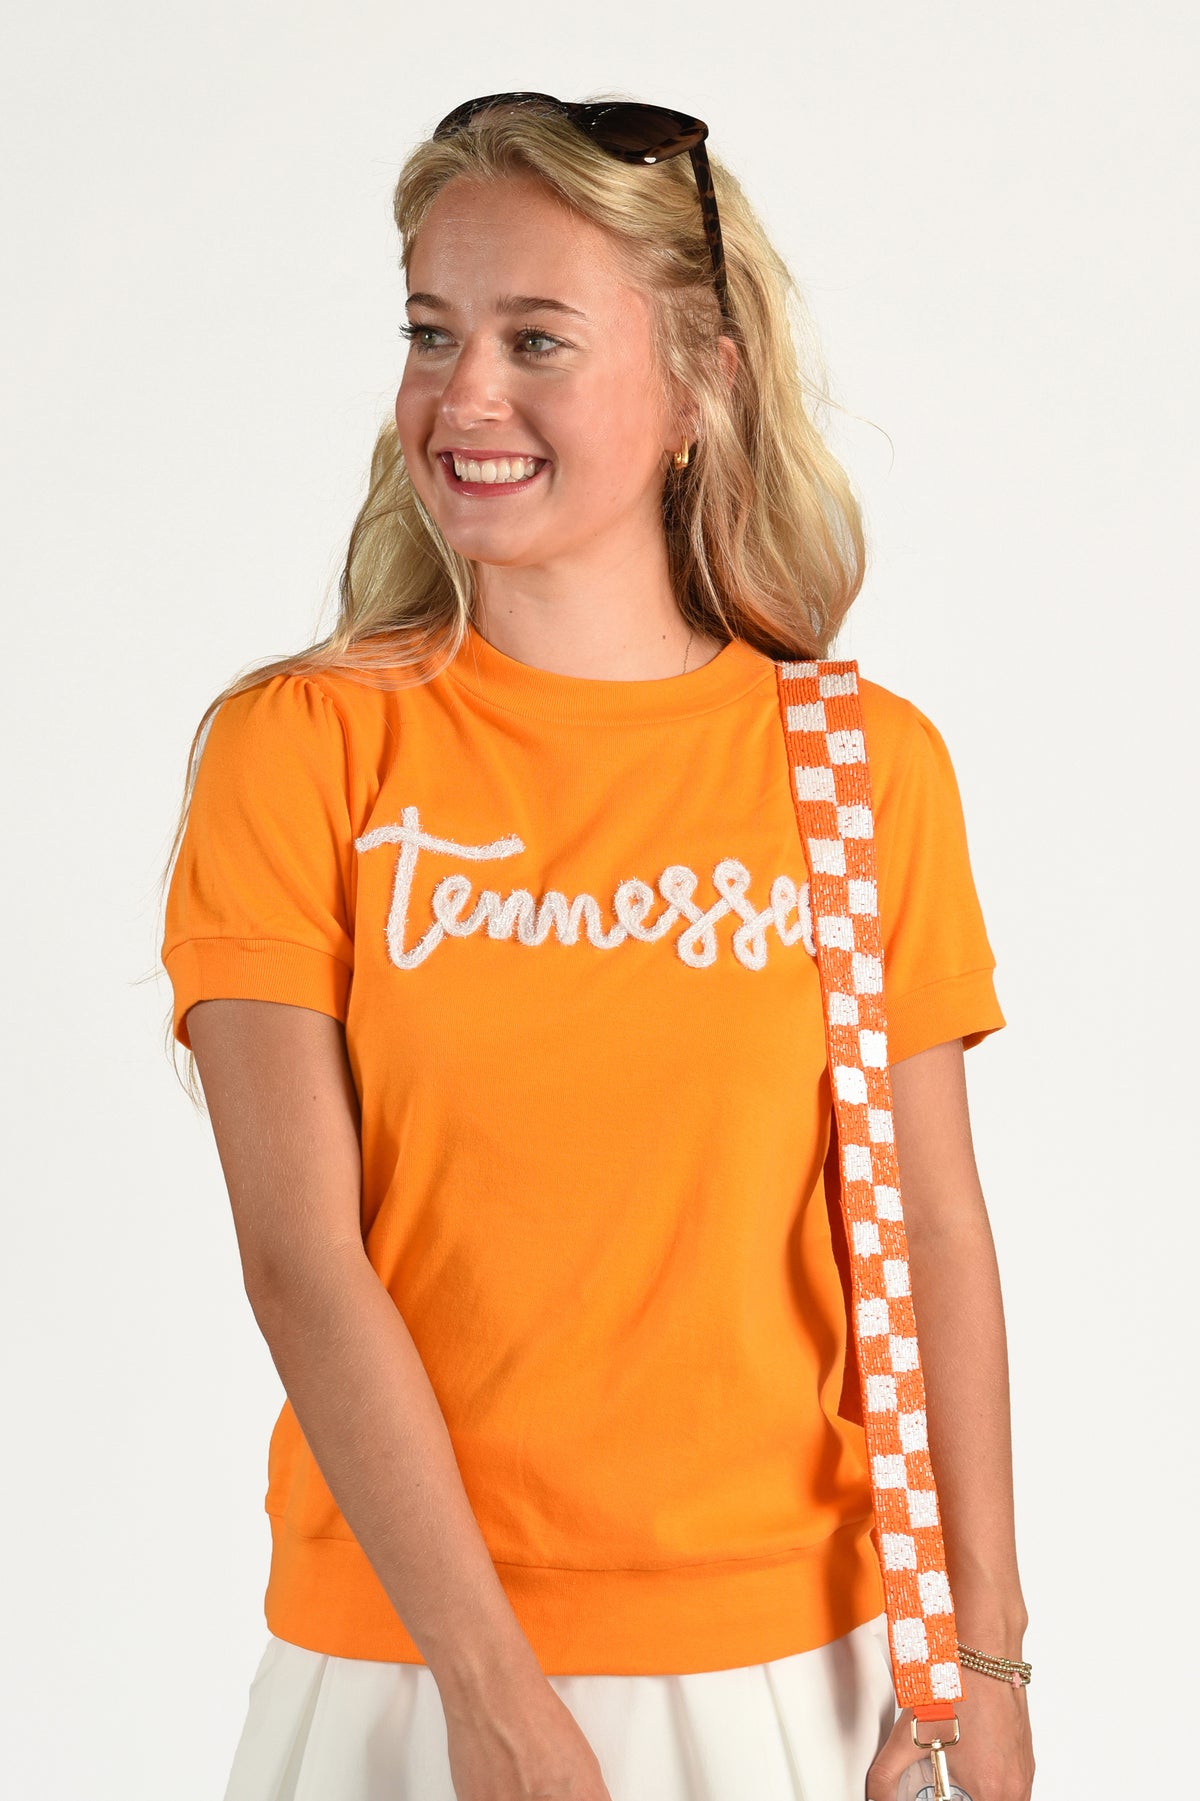 TENNESSEE SCRIPT TOP